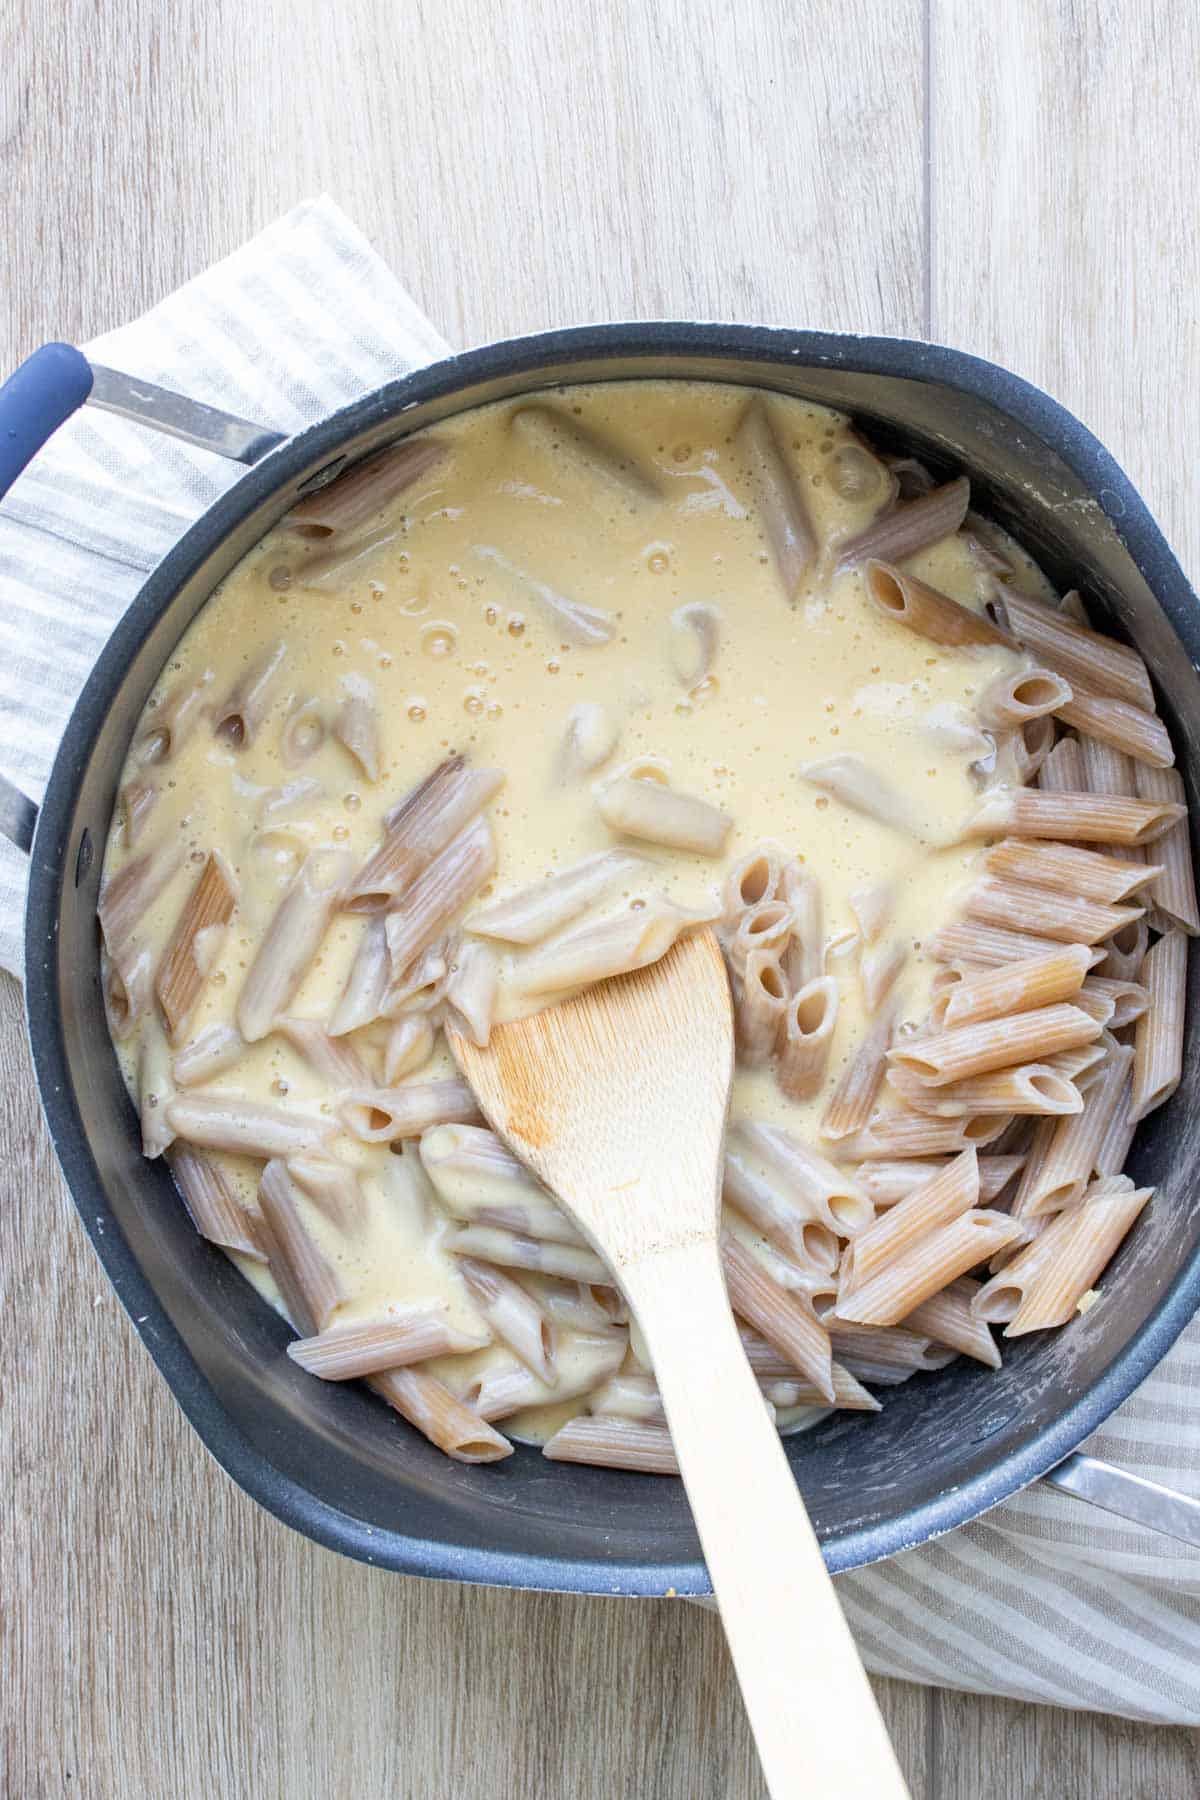 Wooden spoon mixing creamy sauce into a pot of pasta